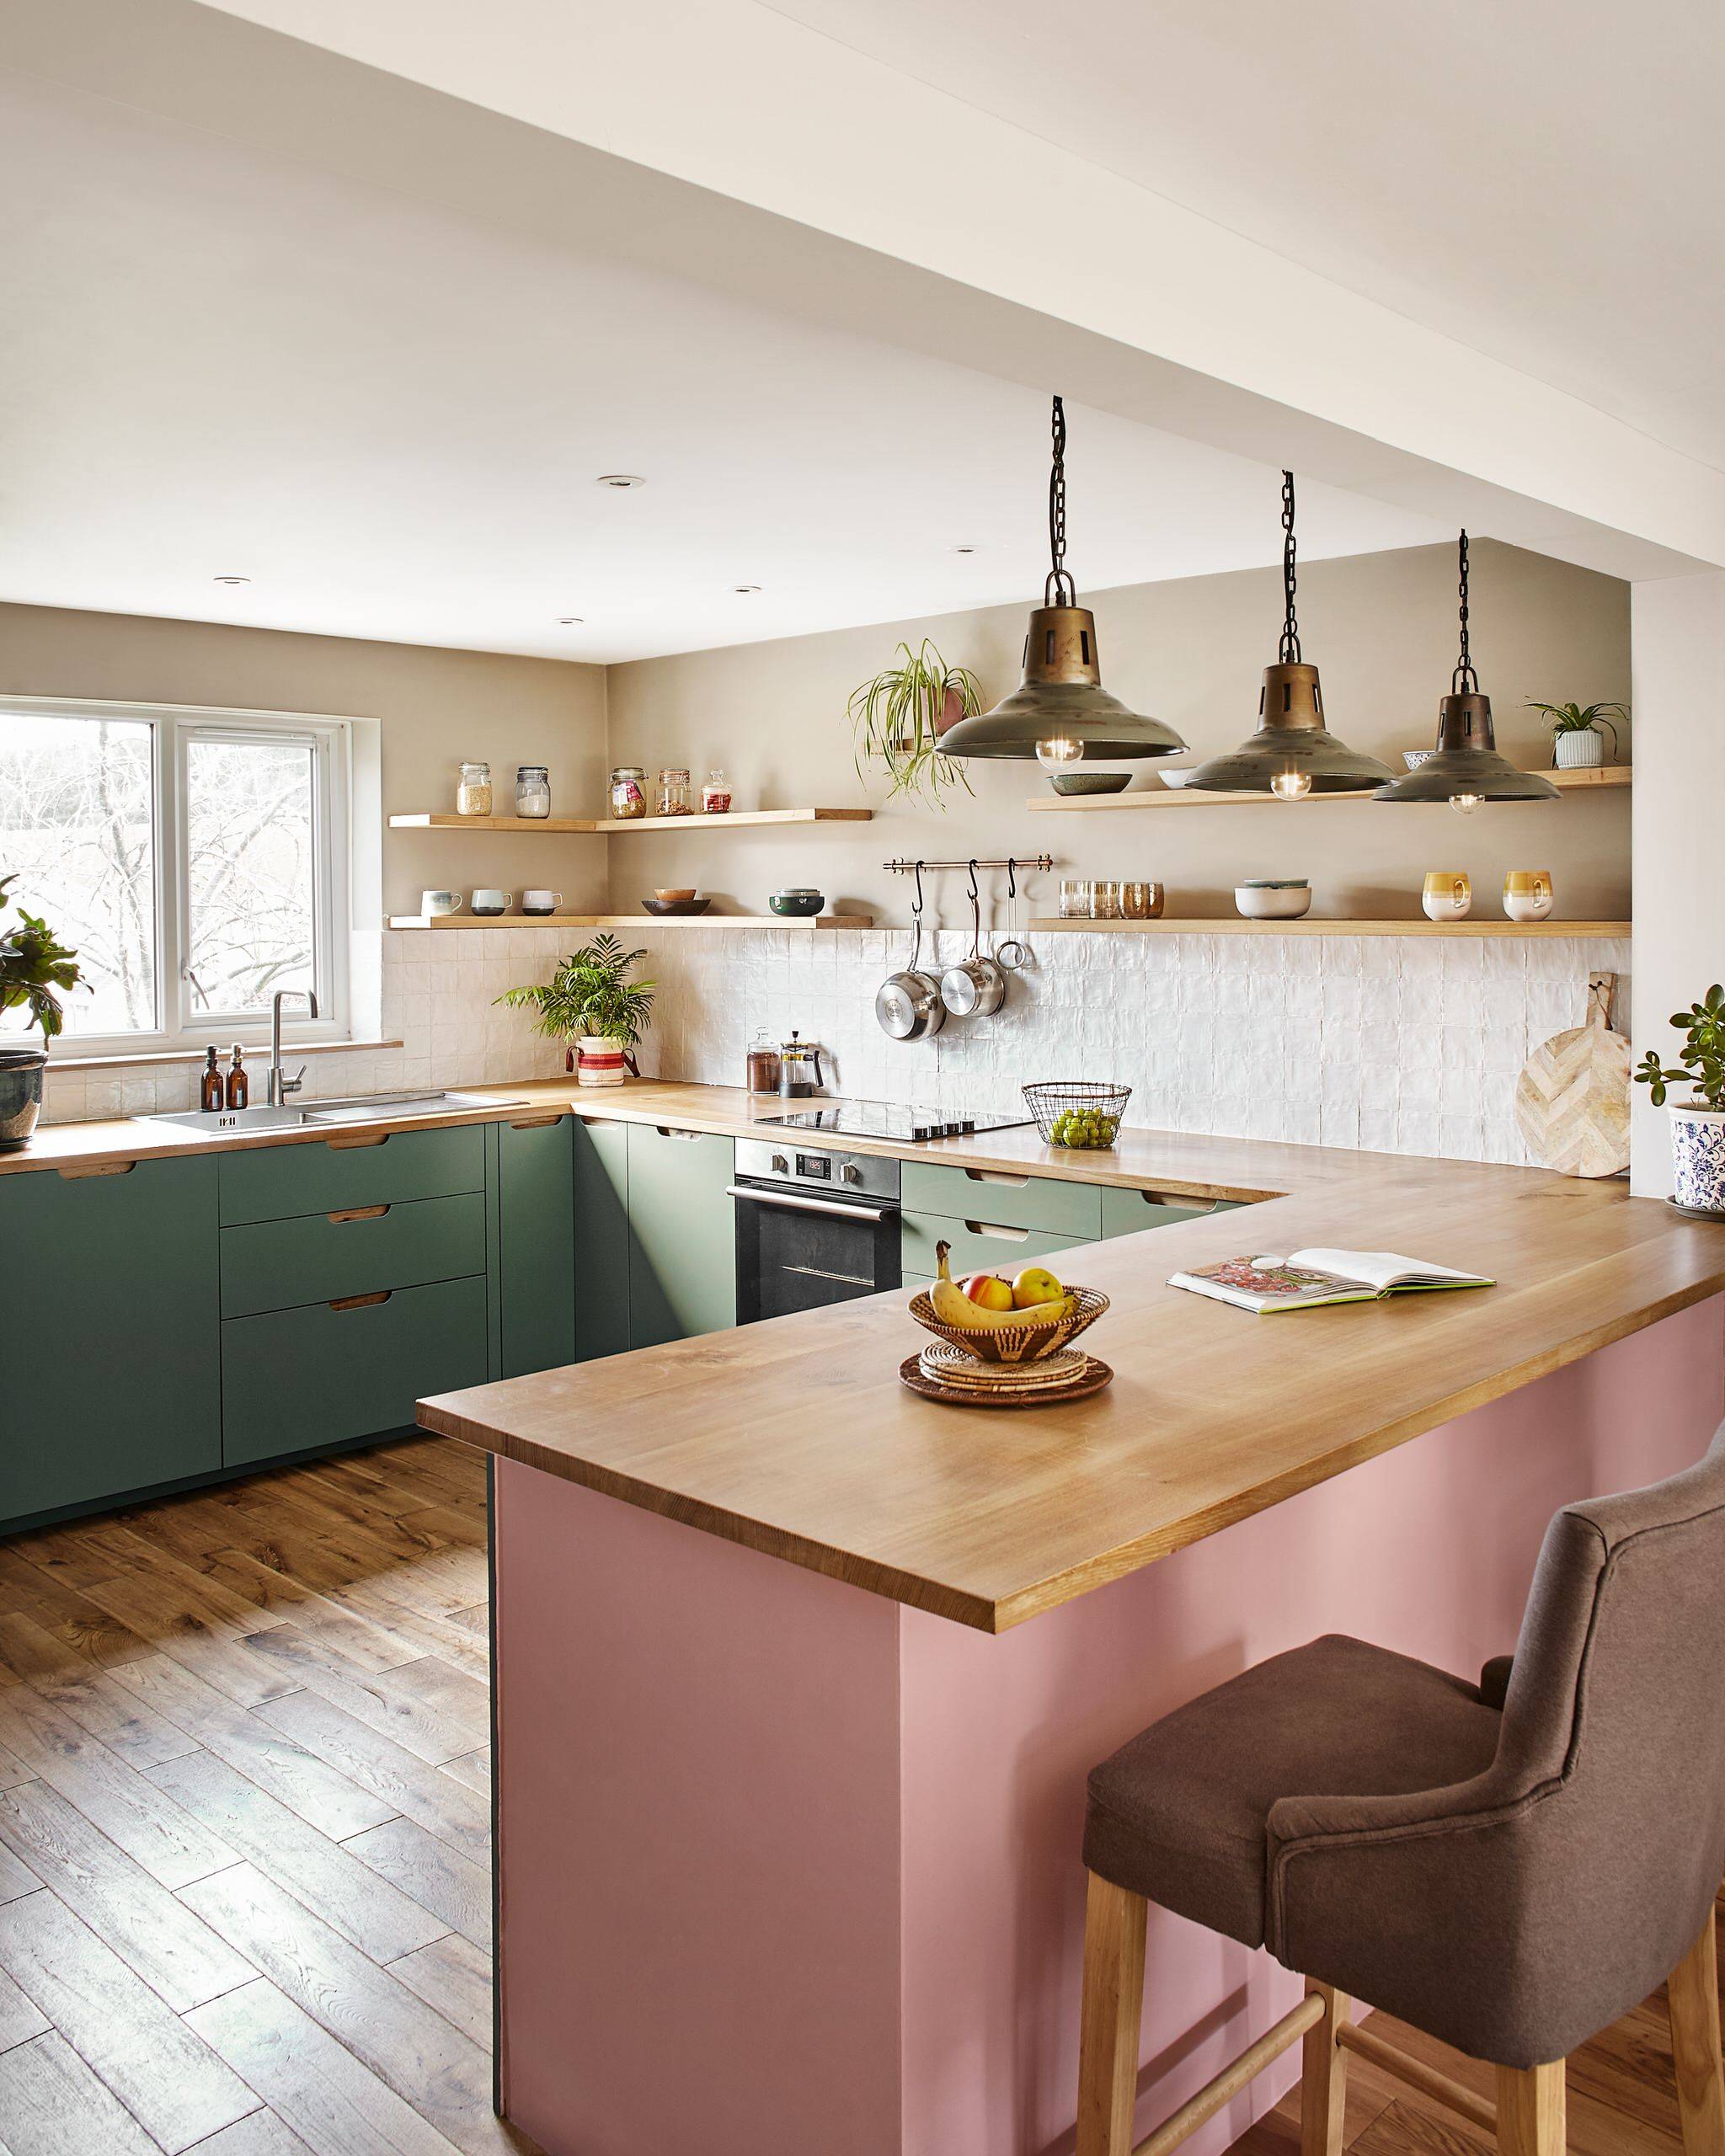 Pastel colors won't be back soon (from Houzz)